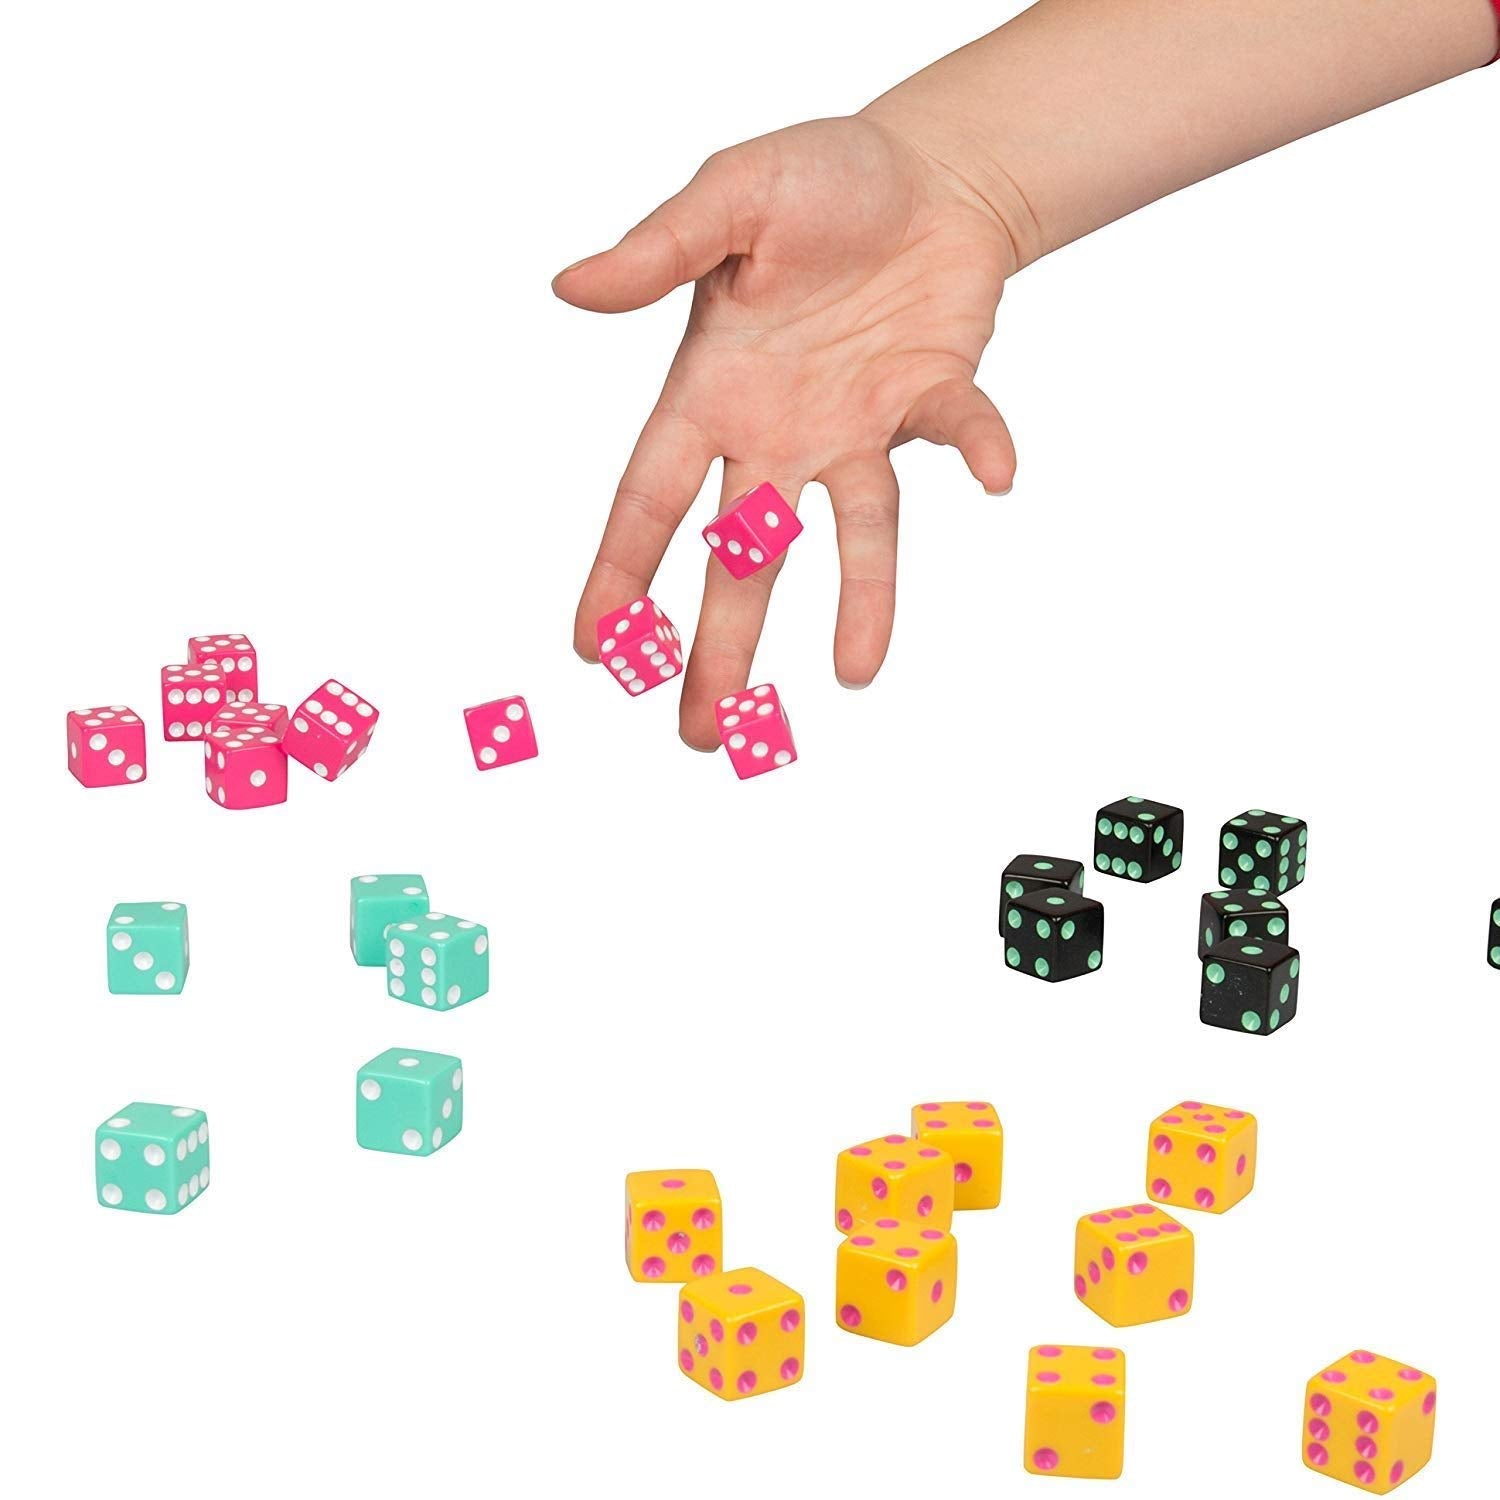 TENZI Dice Party Game - A Fun, Fast Frenzy for The Whole Family - 4 Sets of 10 Colored Dice with Storage Tube - Colors May Vary